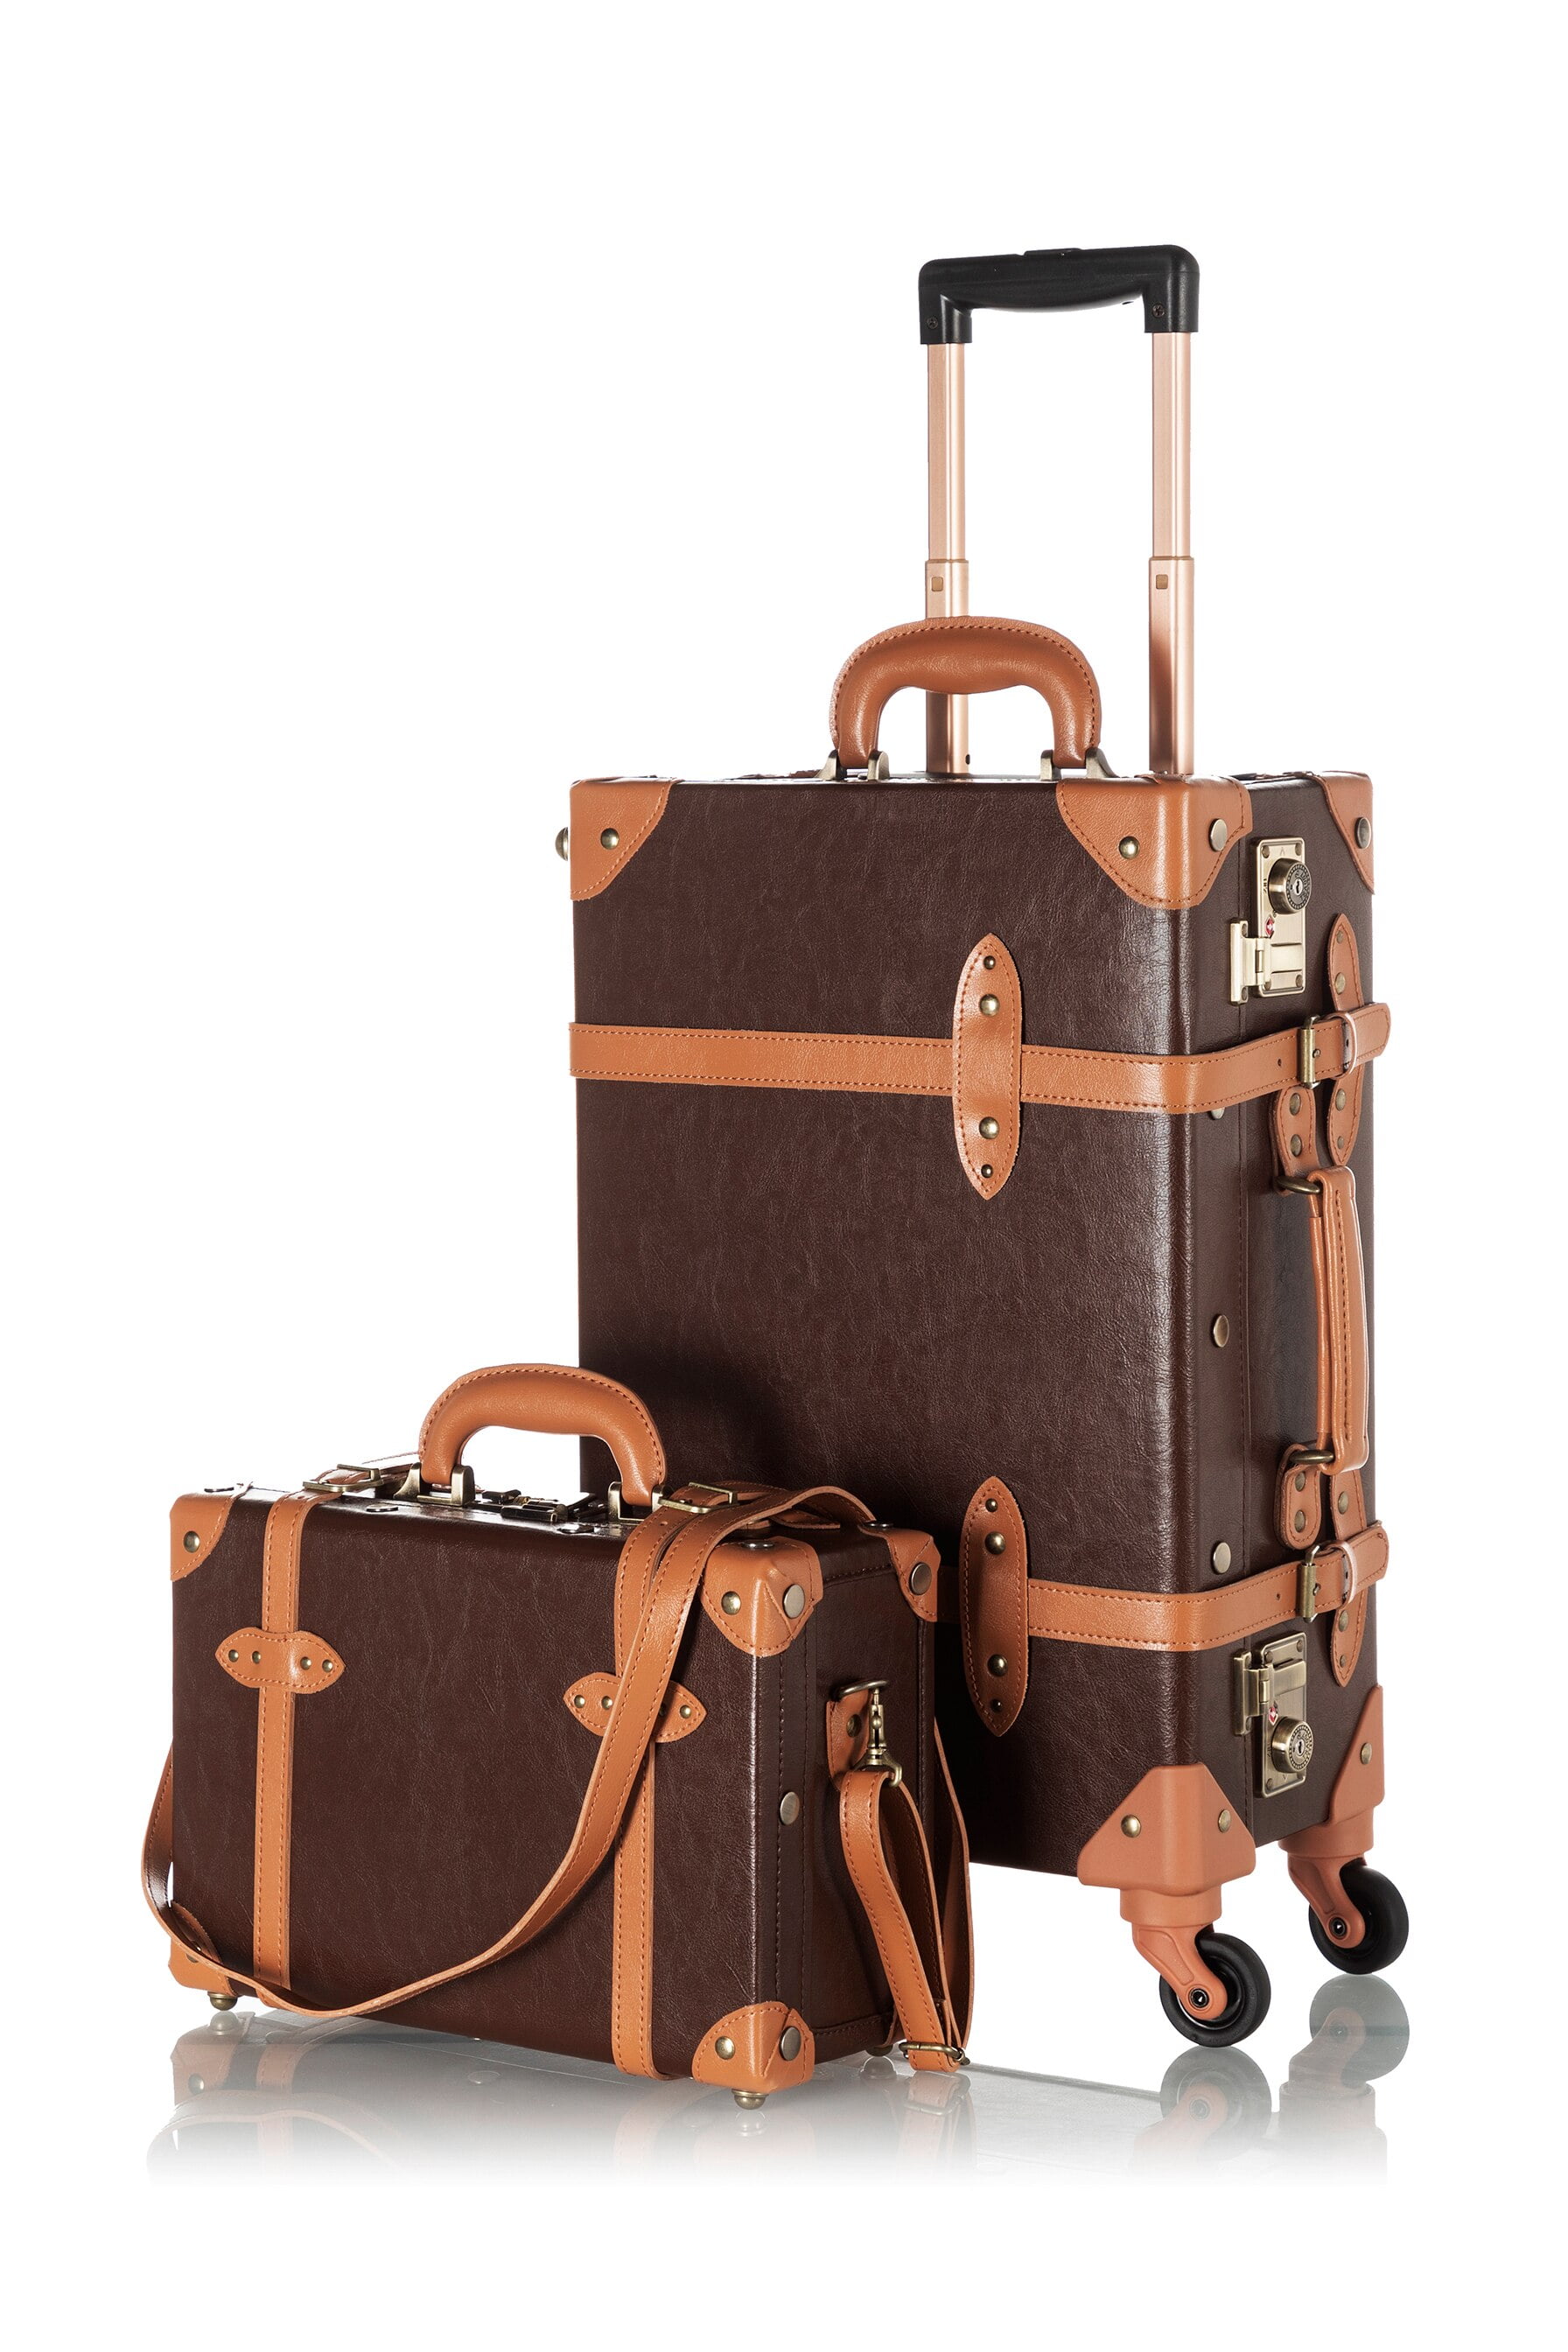 COTRUNKAGE Vintage Luggage Sets 2 Pieces TSA Lock Carry On Suitcase for  Women with Spinner Wheels, Cocoa Brown